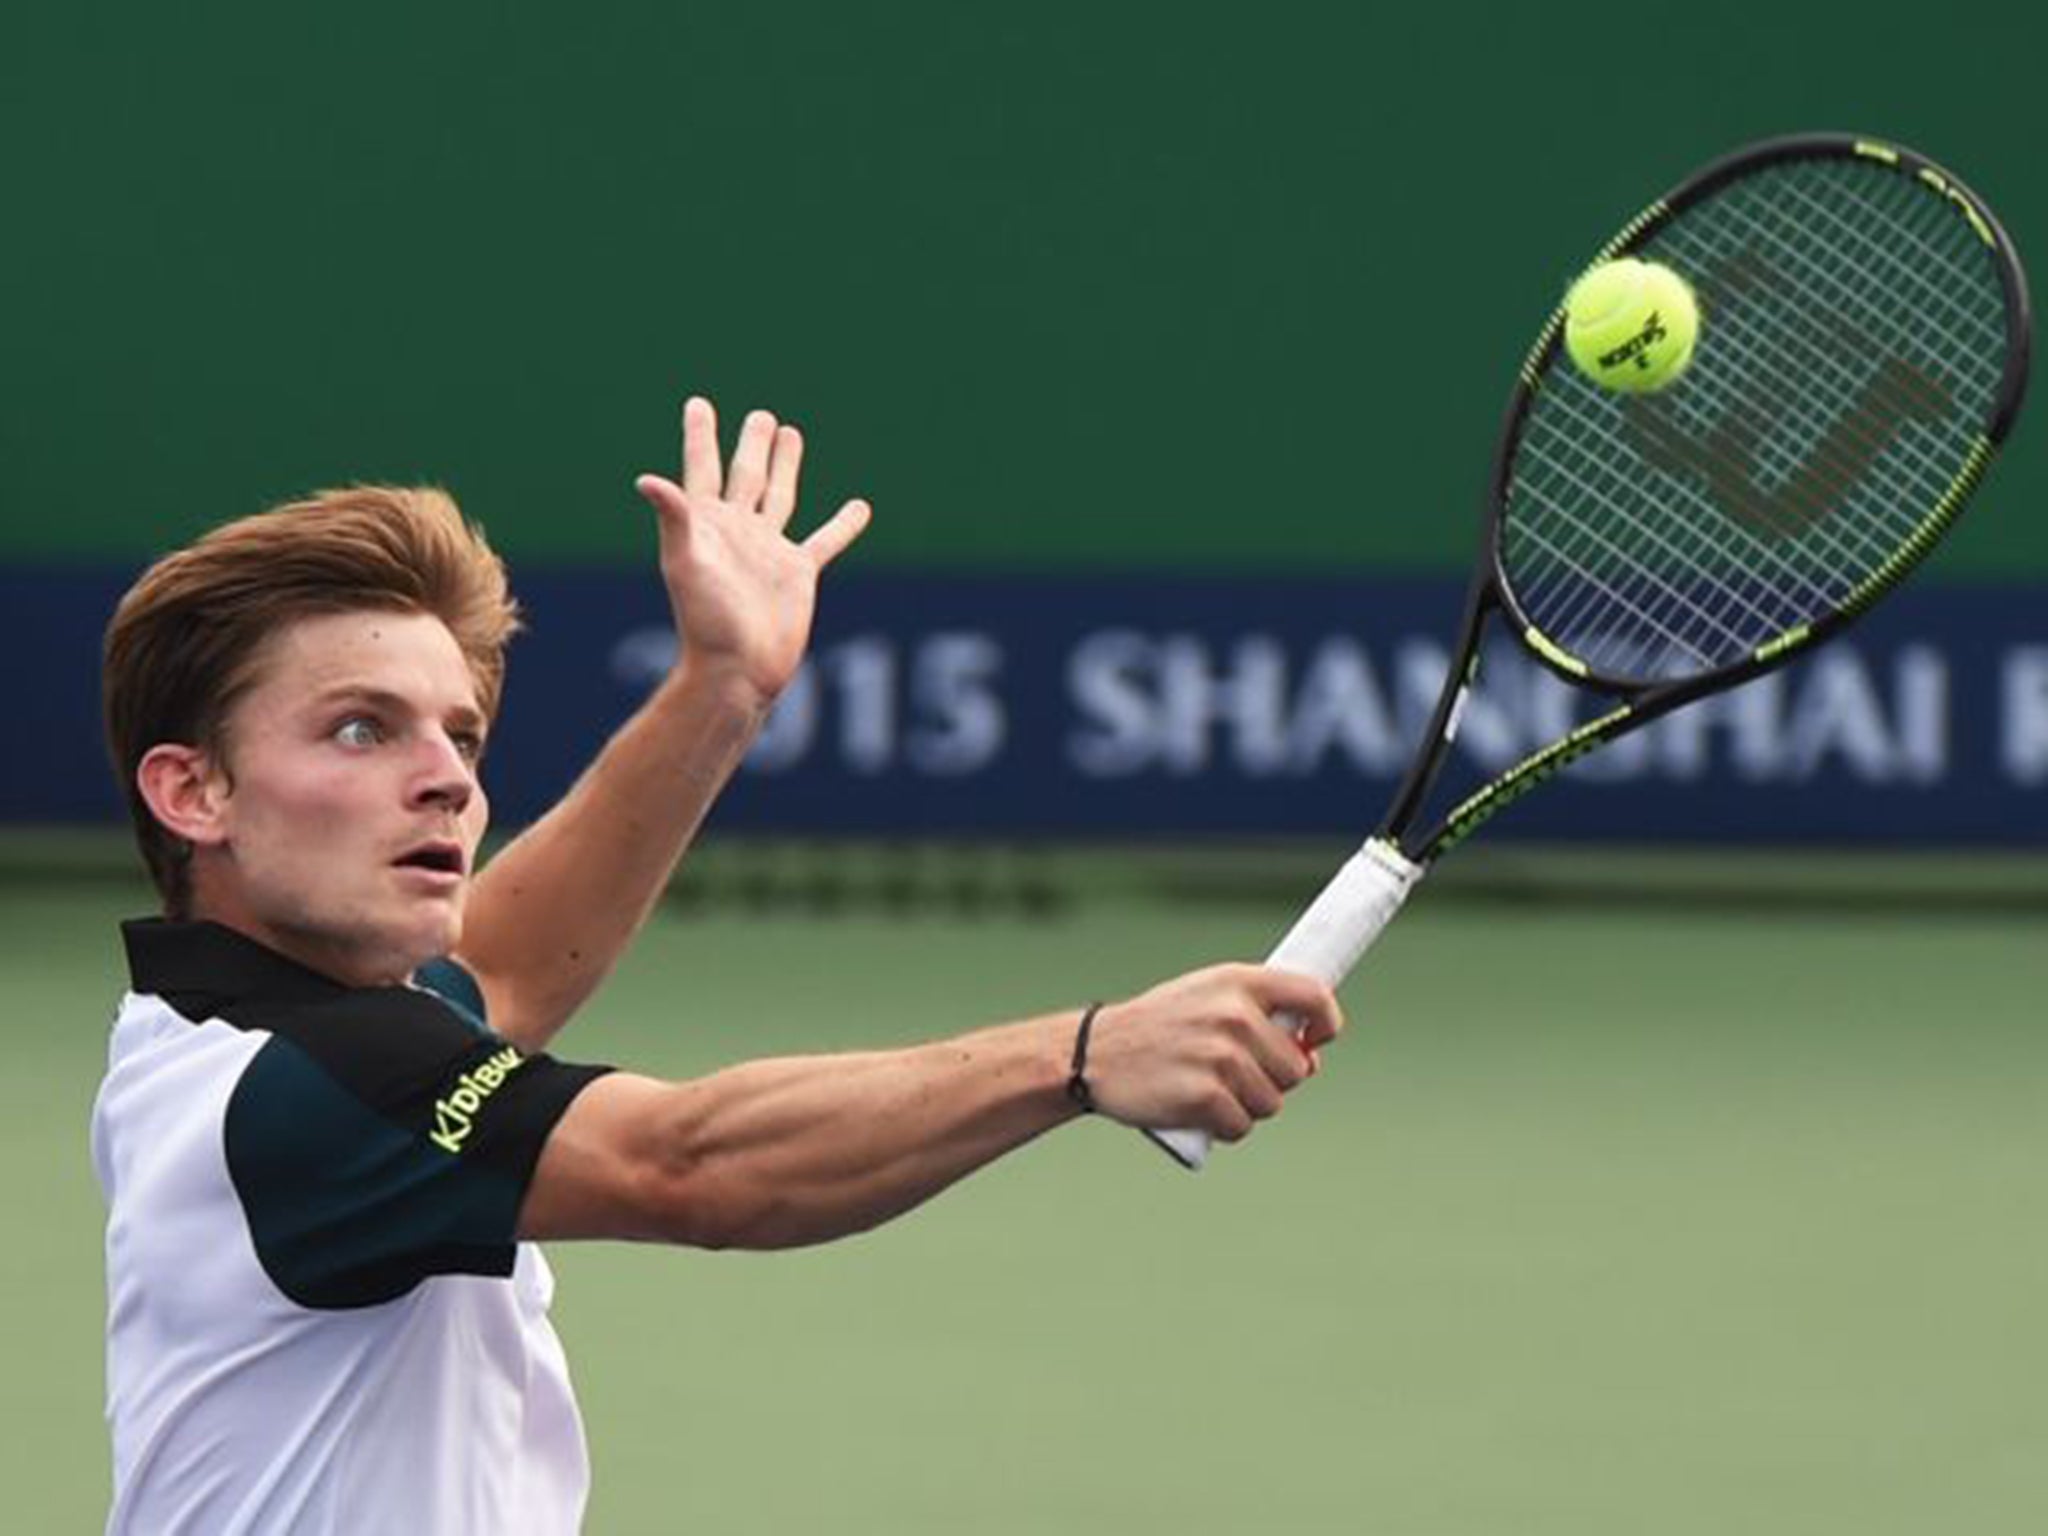 Surface tension: David Goffin feels playing next month’s Davis Cup final on clay will help determine the outcome